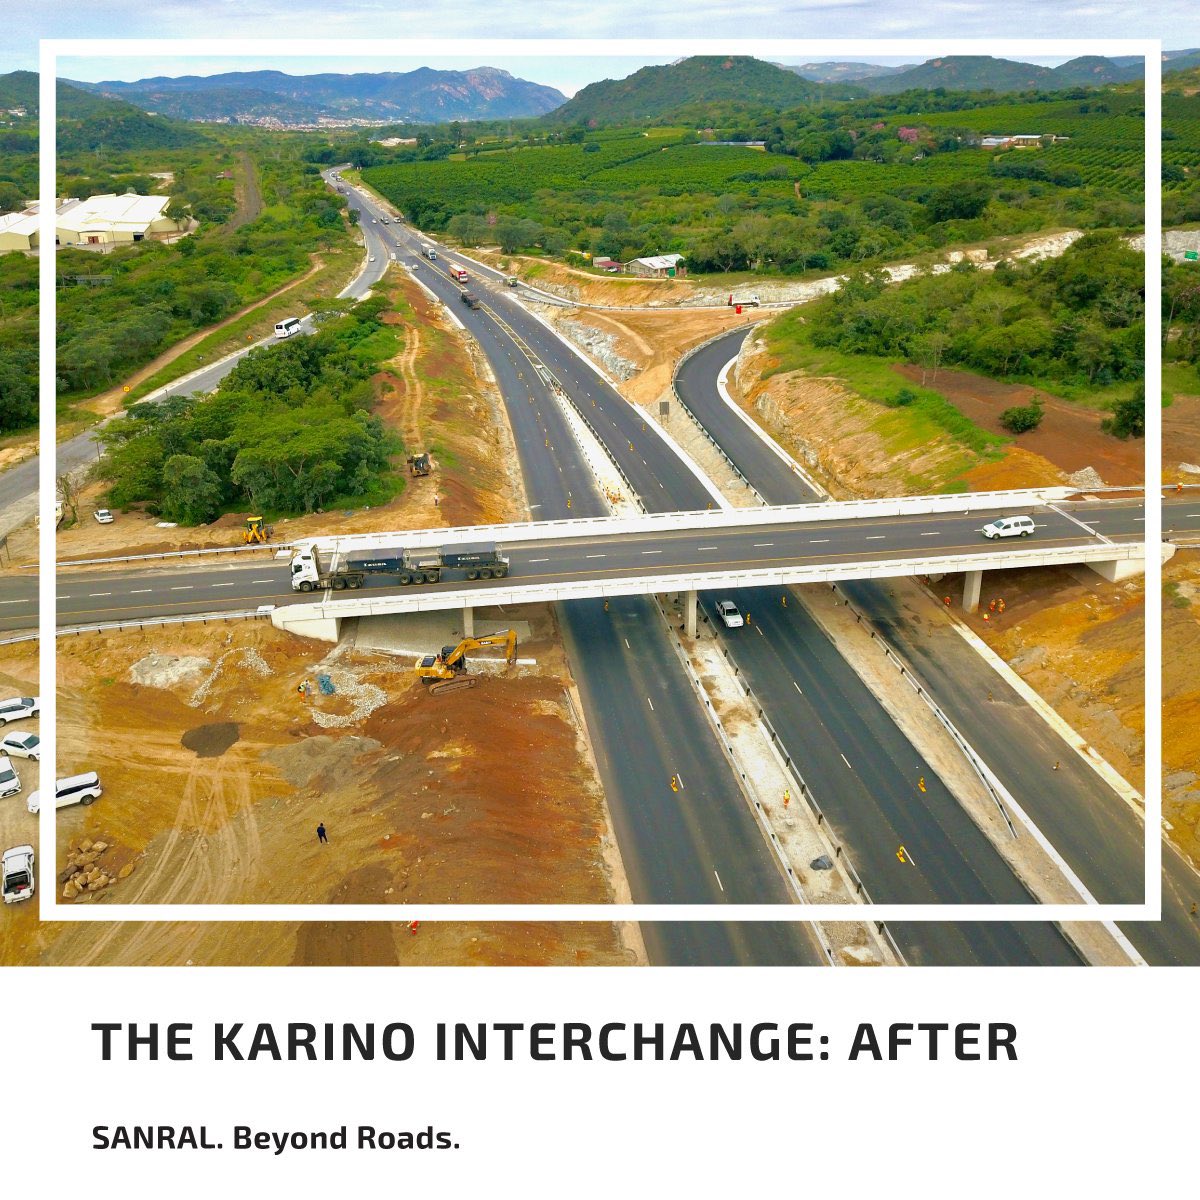 The Karino Interchange, before and after.

Read more about this project here: bit.ly/3JbqU5t

#BeyondRoads #RoadSafety #Roads #SANRALroads